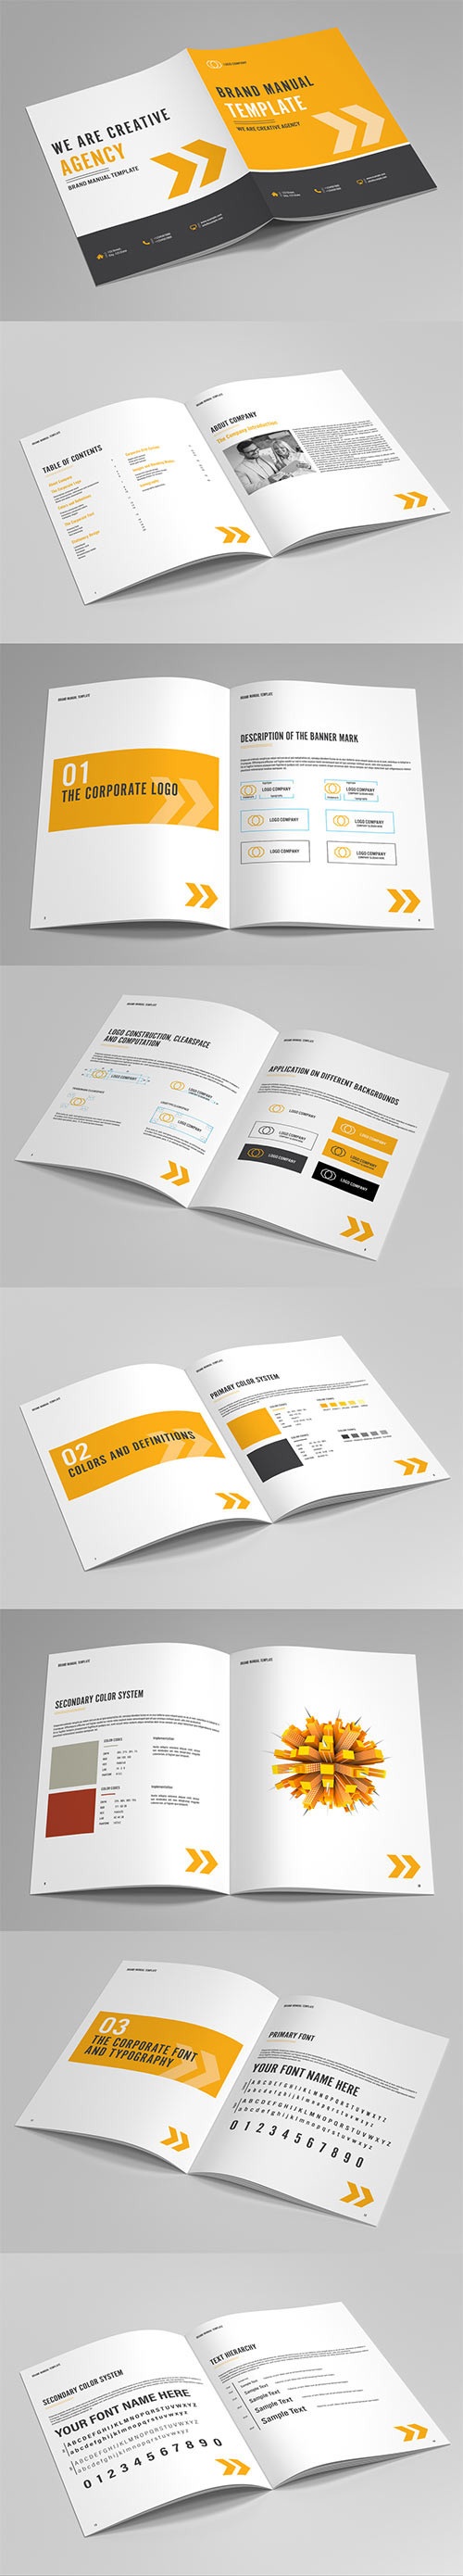 Brand Manual Layout with Orange Accents 1